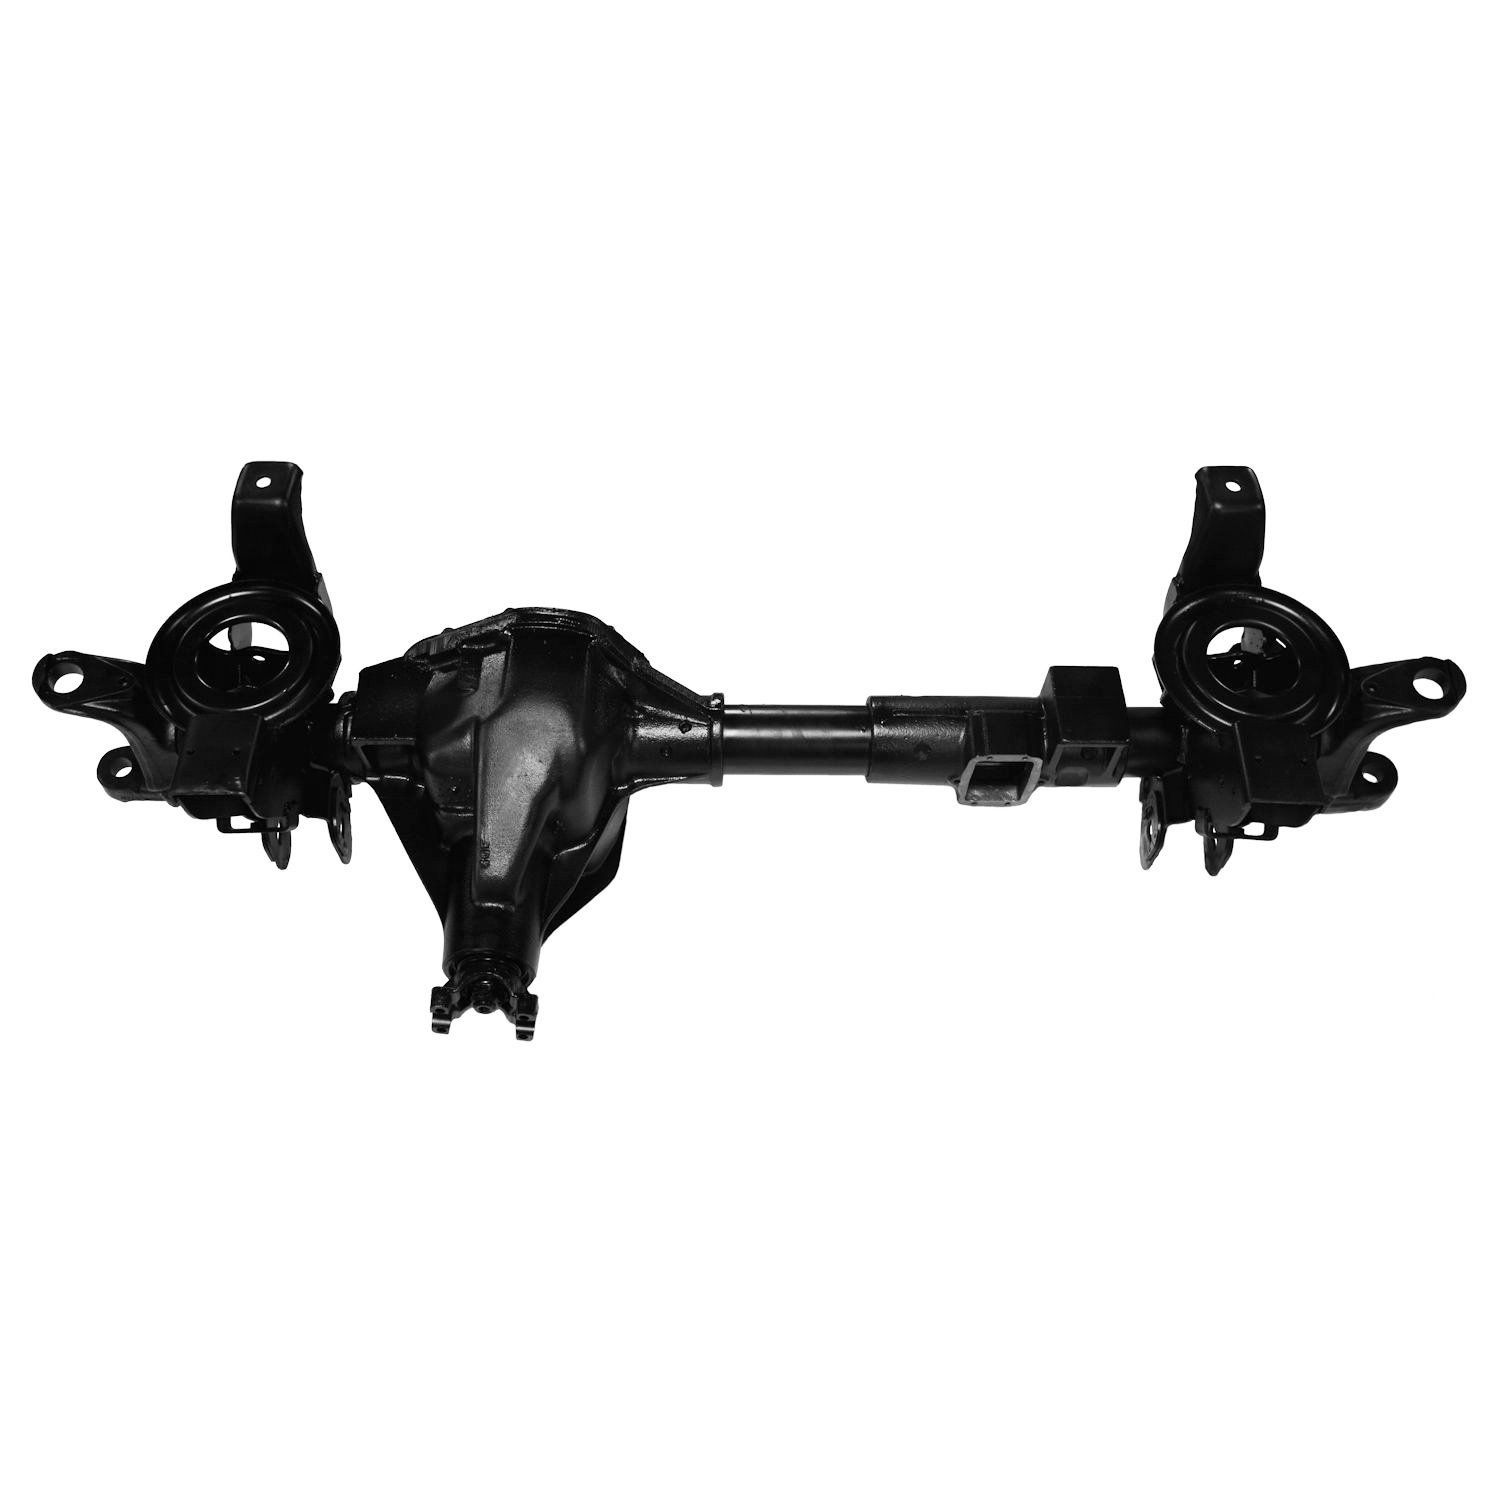 Remanufactured Axle Assy for Dana 60 Front 94-97 Ram 2500 & 3500 3.54 w/ Rear Wheel ABS